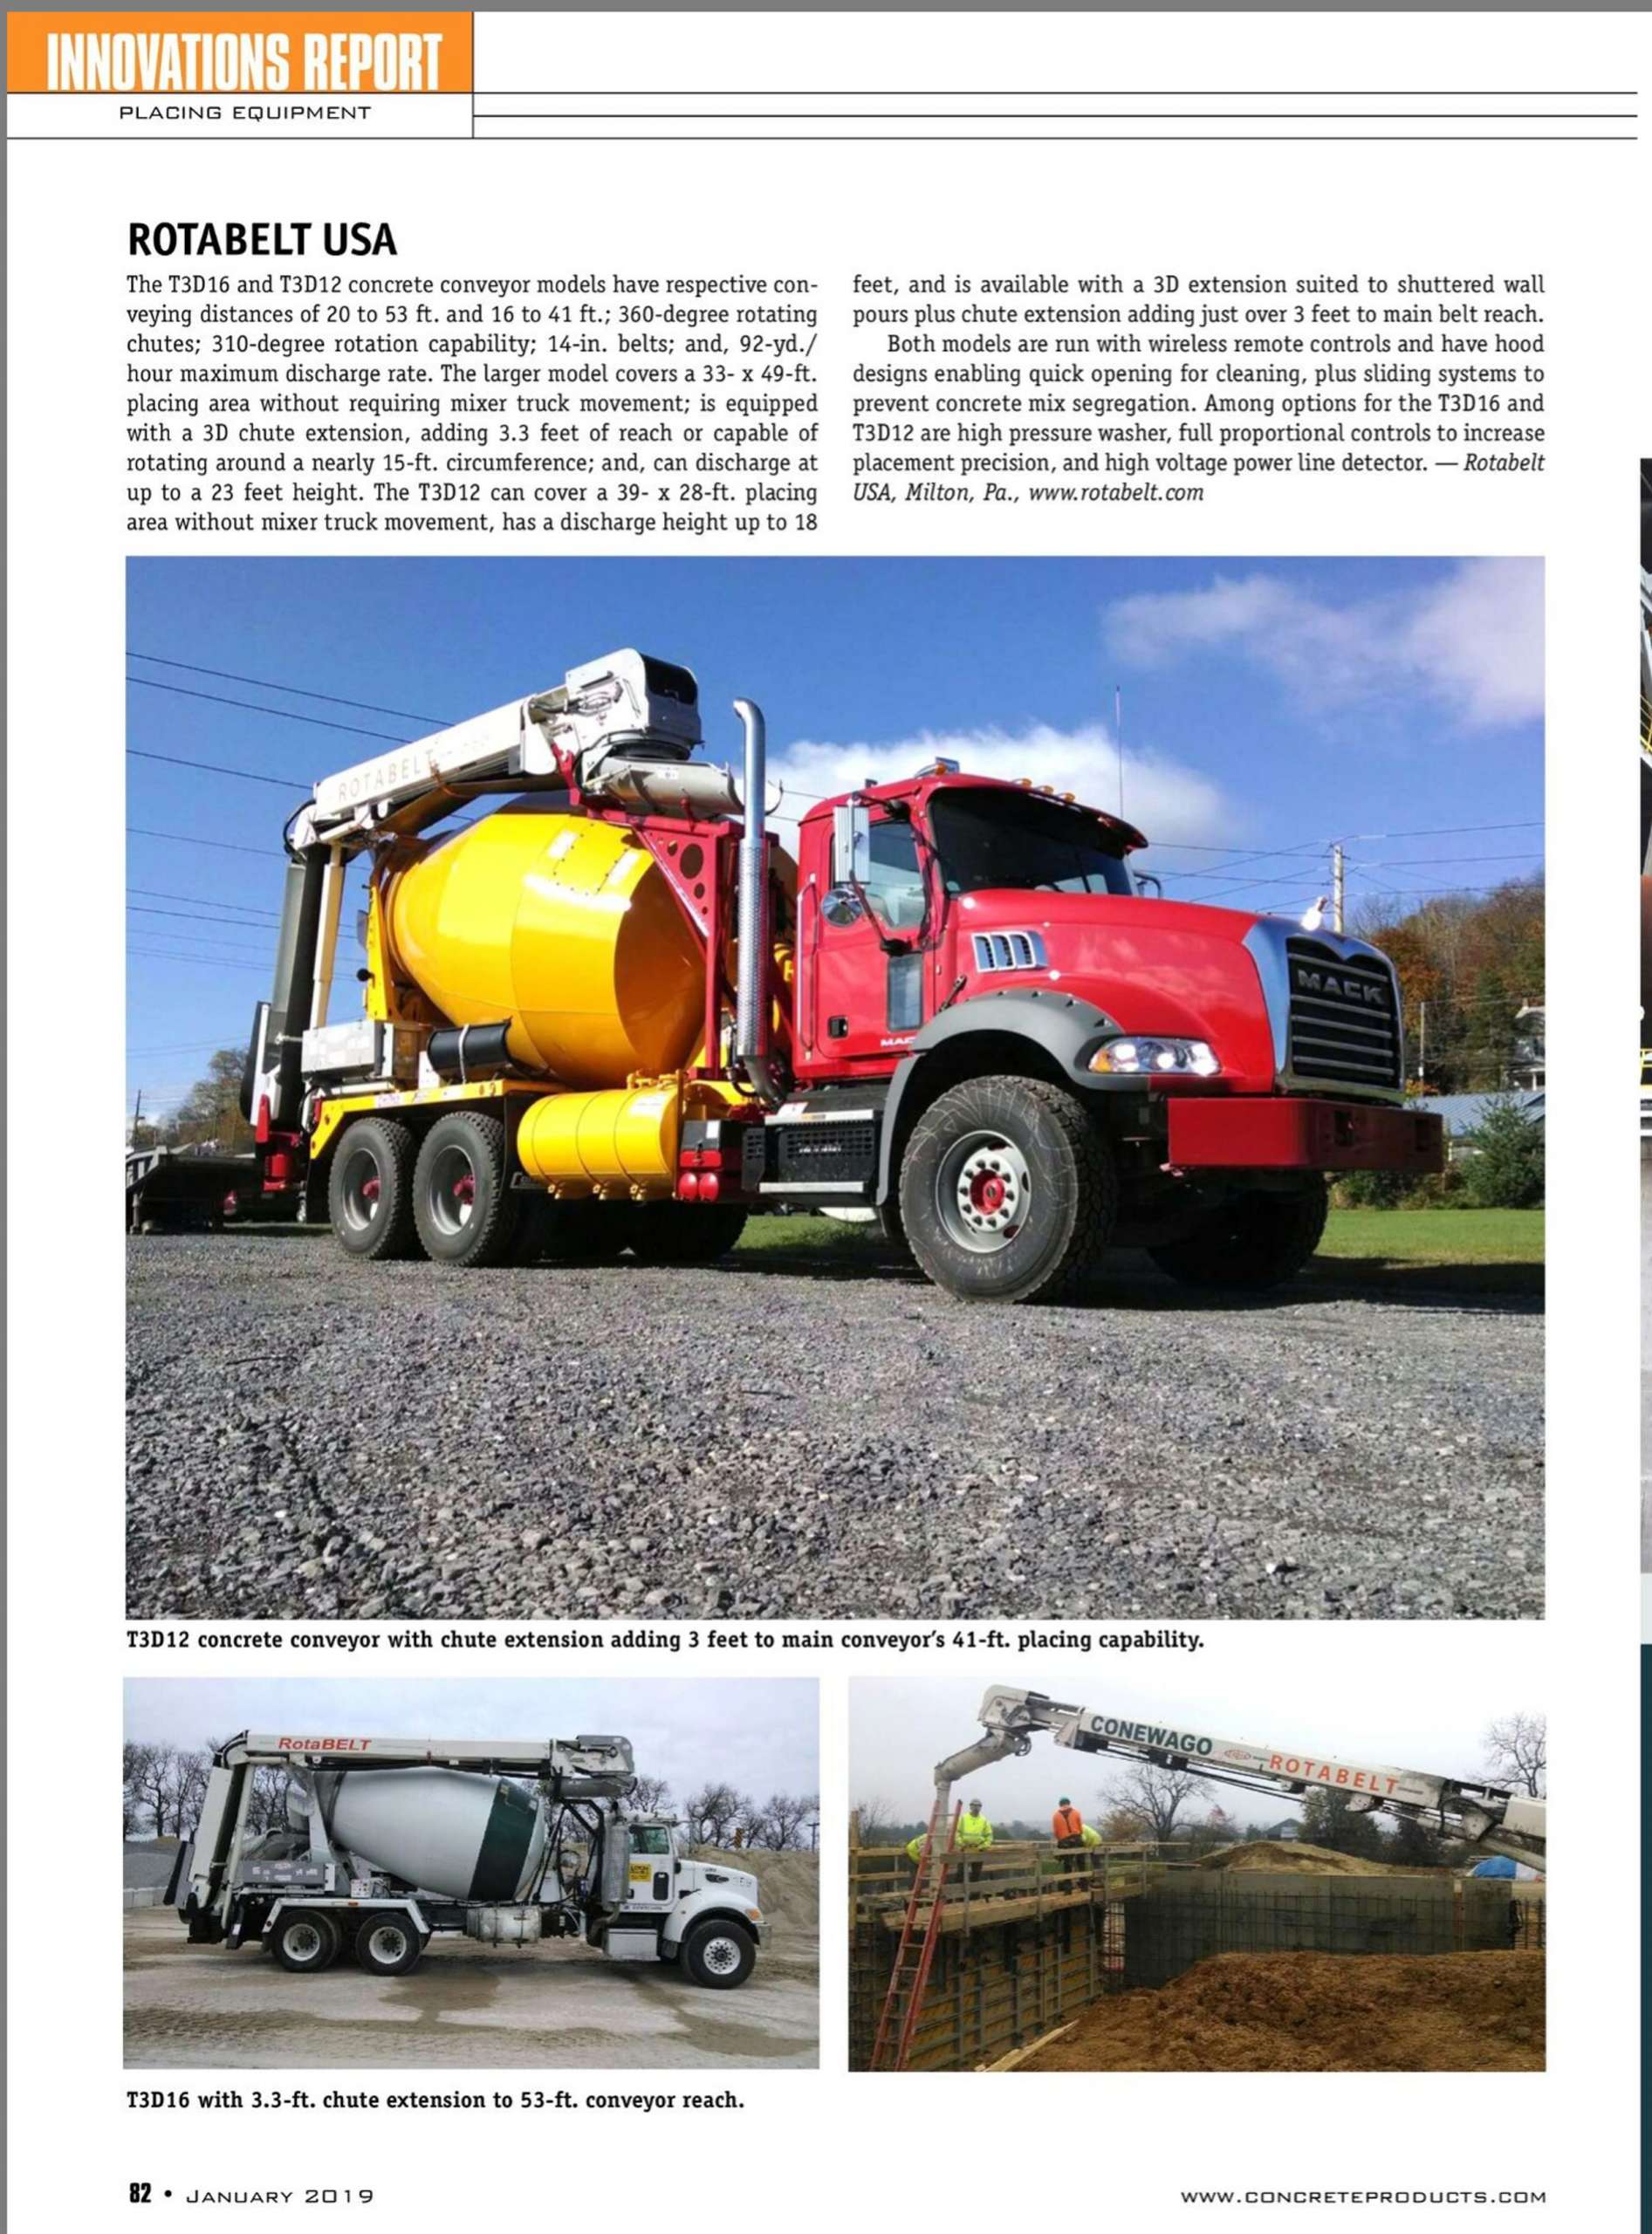 Rotabelt article in Concrete Products January 2019